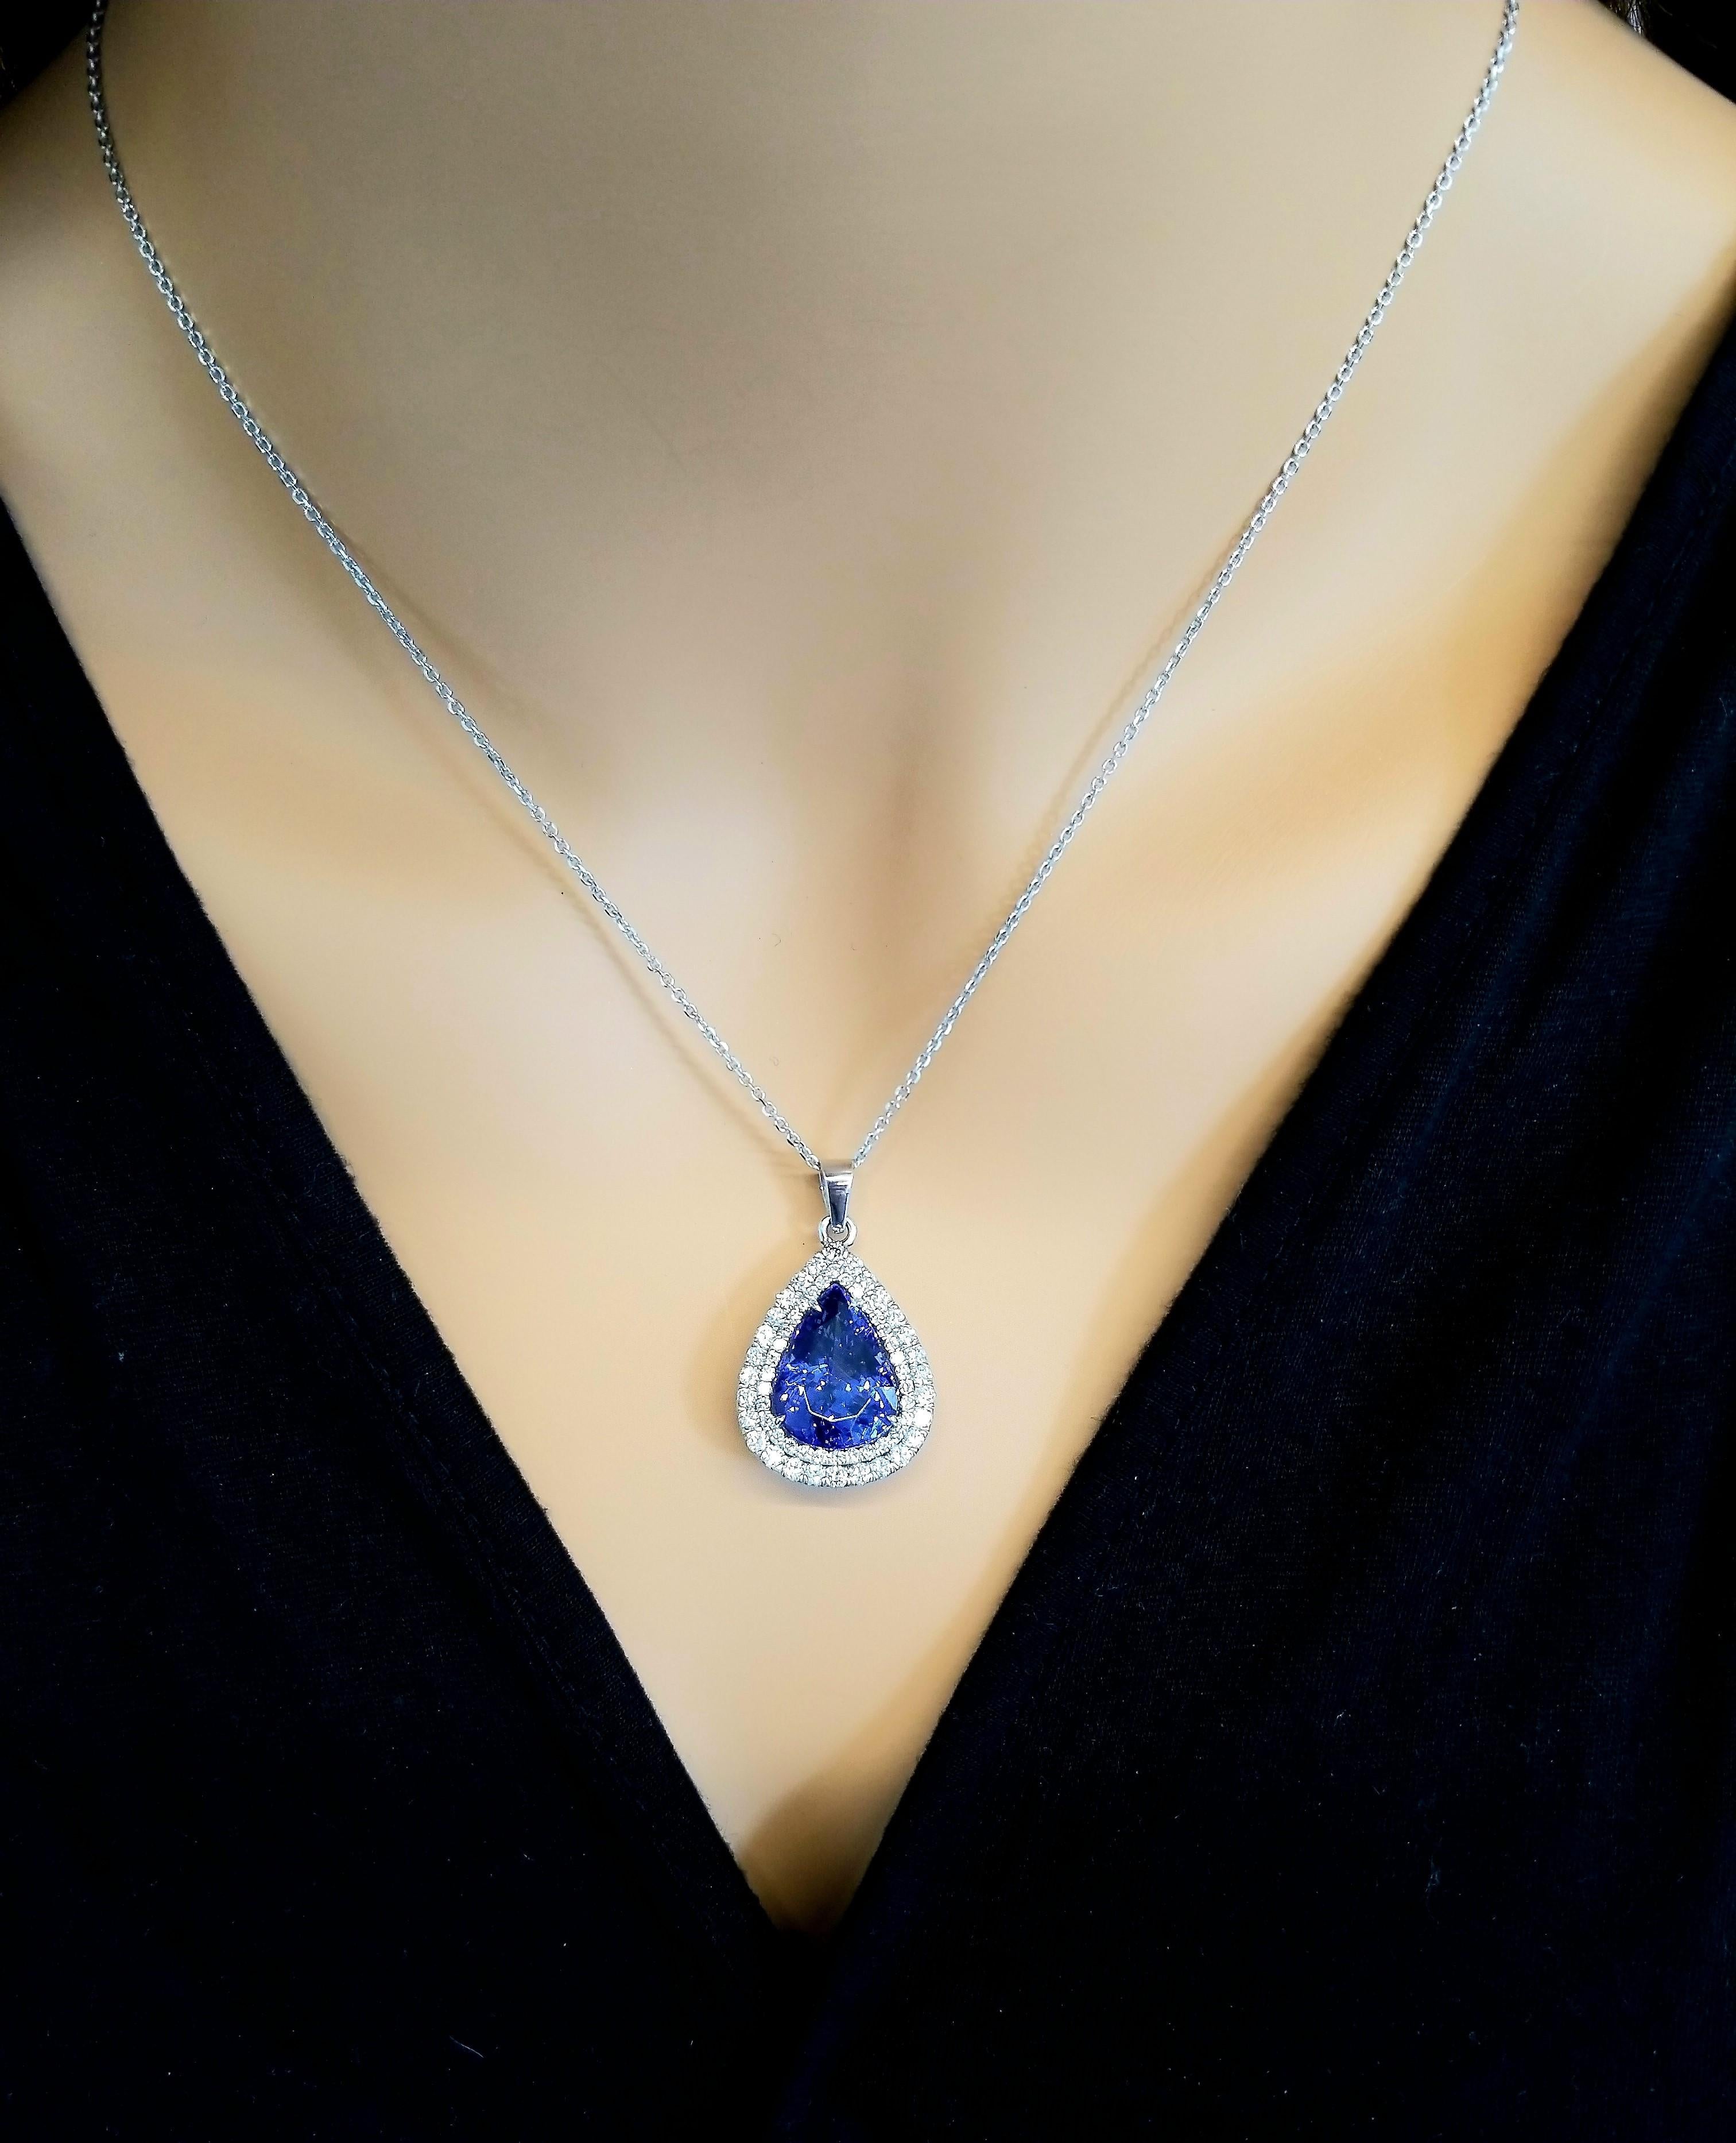 This piece was designed around the 9.45 carat pear-shaped tanzanite. The gem source is near the foothills of Mt. Kilimanjaro in Tanzania. The intense blue-violet color resembles fine blue sapphire. The saturation is what you want; its transparency